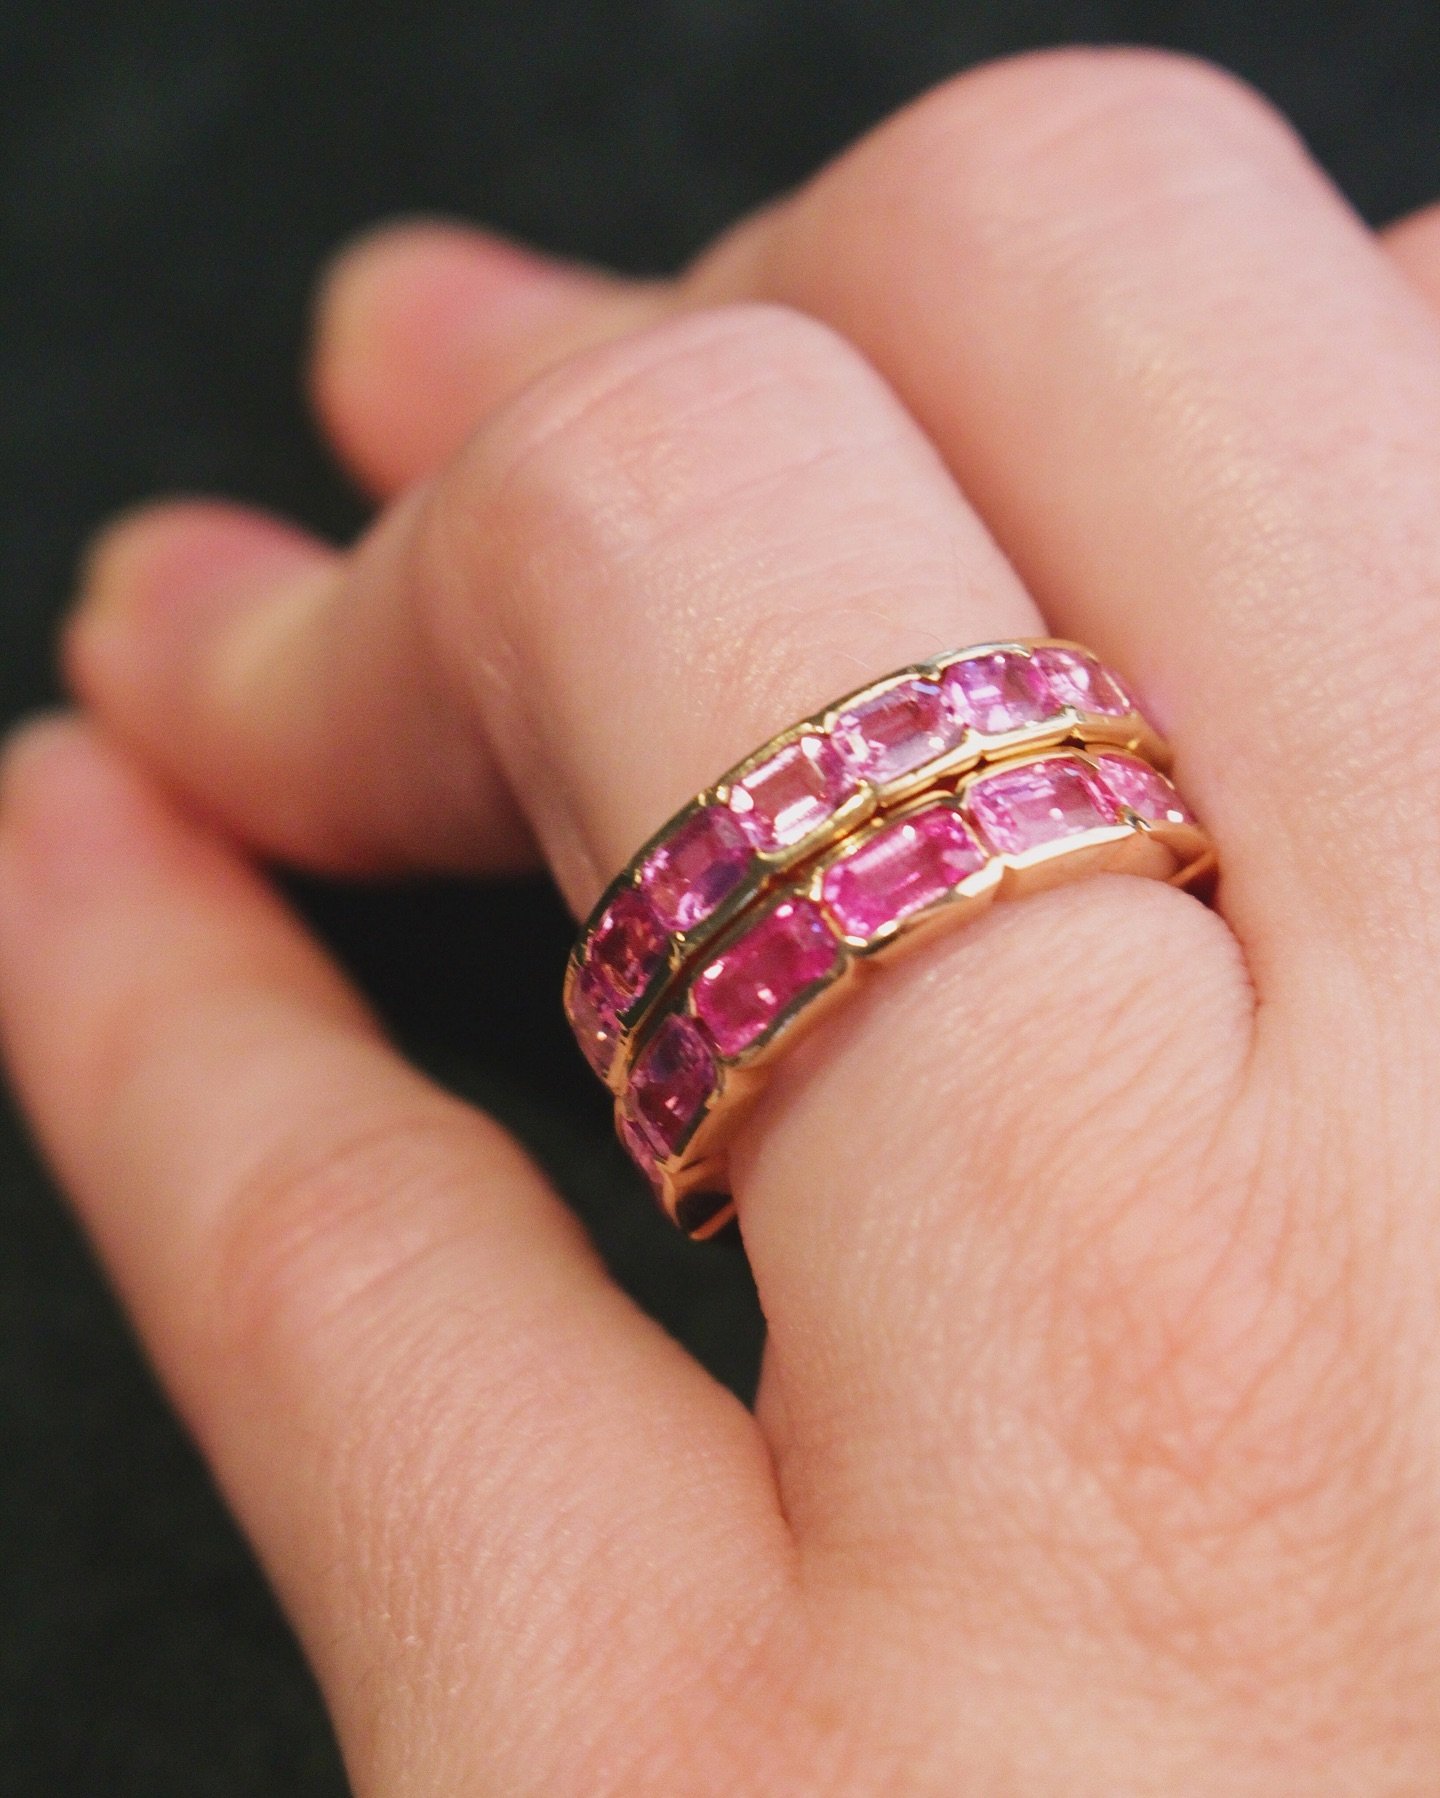 Think pink! Jen&rsquo;s favorite color!
💕
#thinkpink #pink #rings #spring #colorful #jewelry #mothersday #pinksapphire